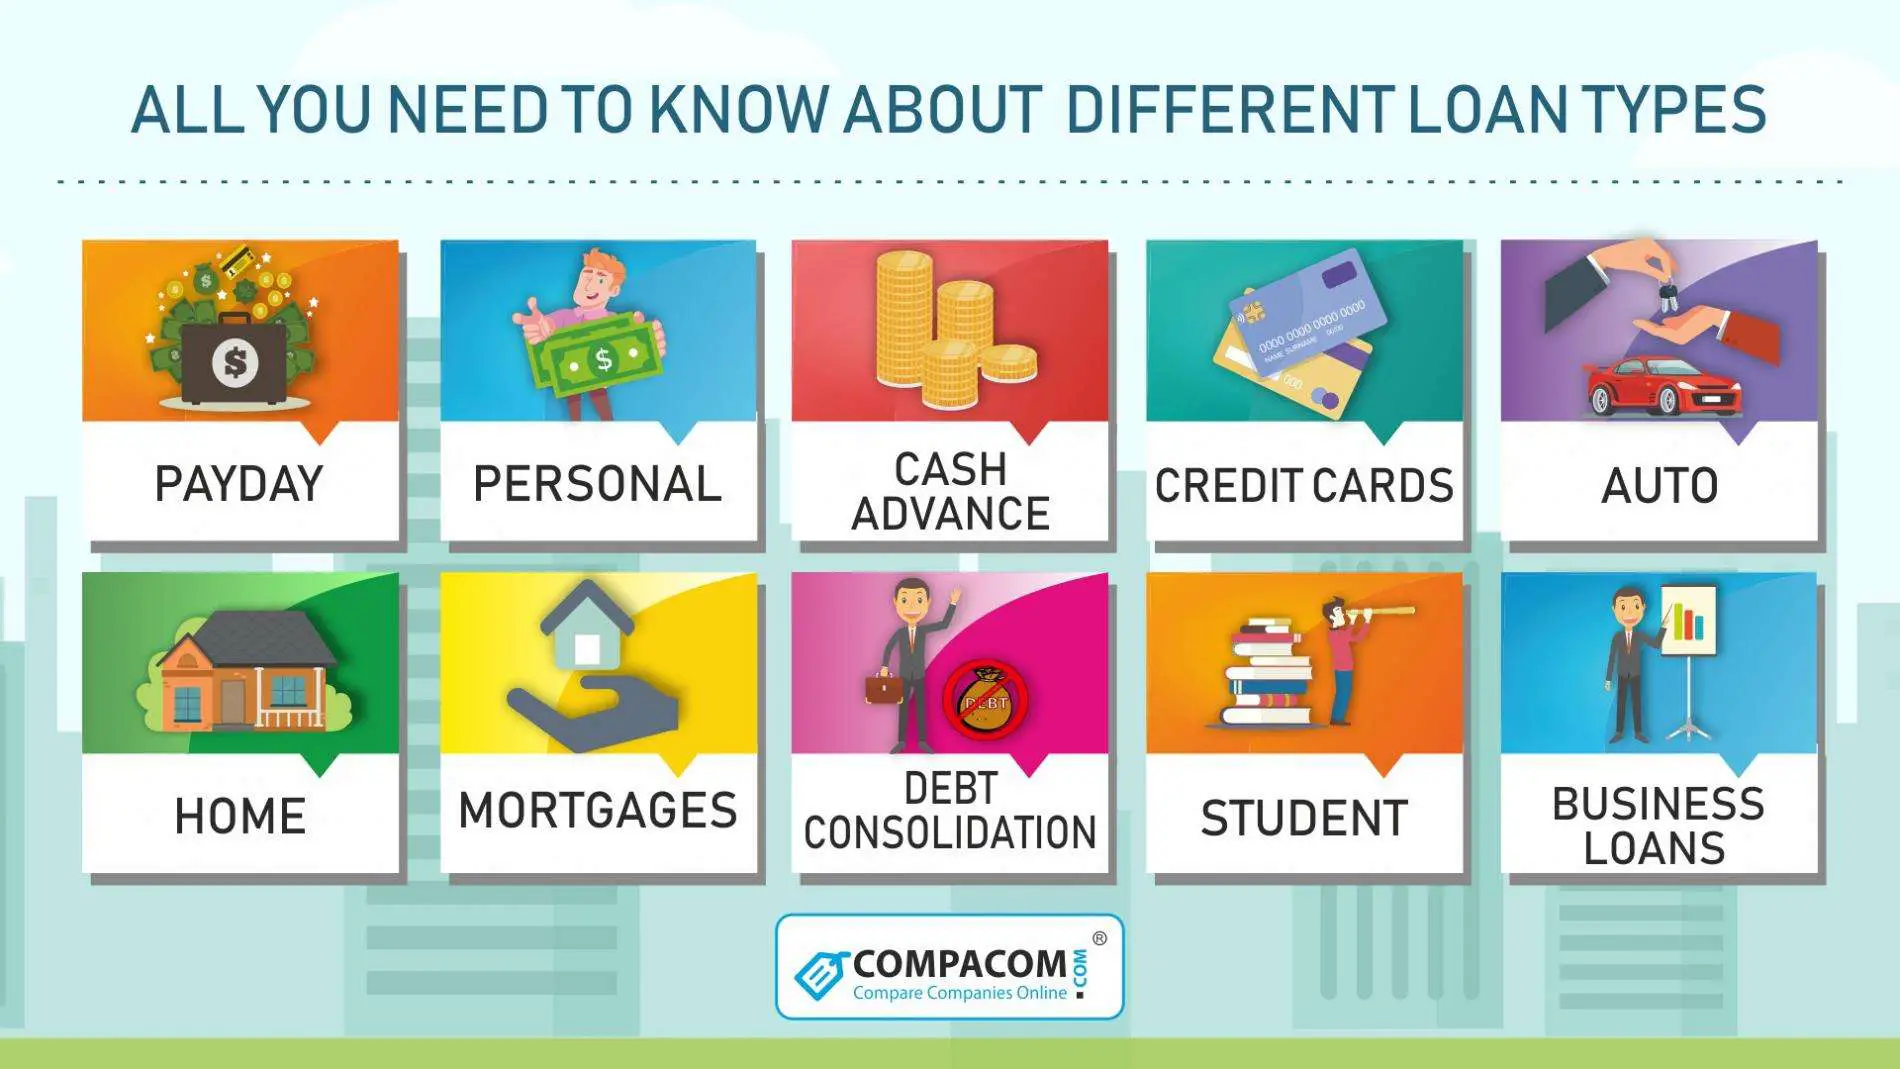 All You Need to Know about Different Types of Loans.